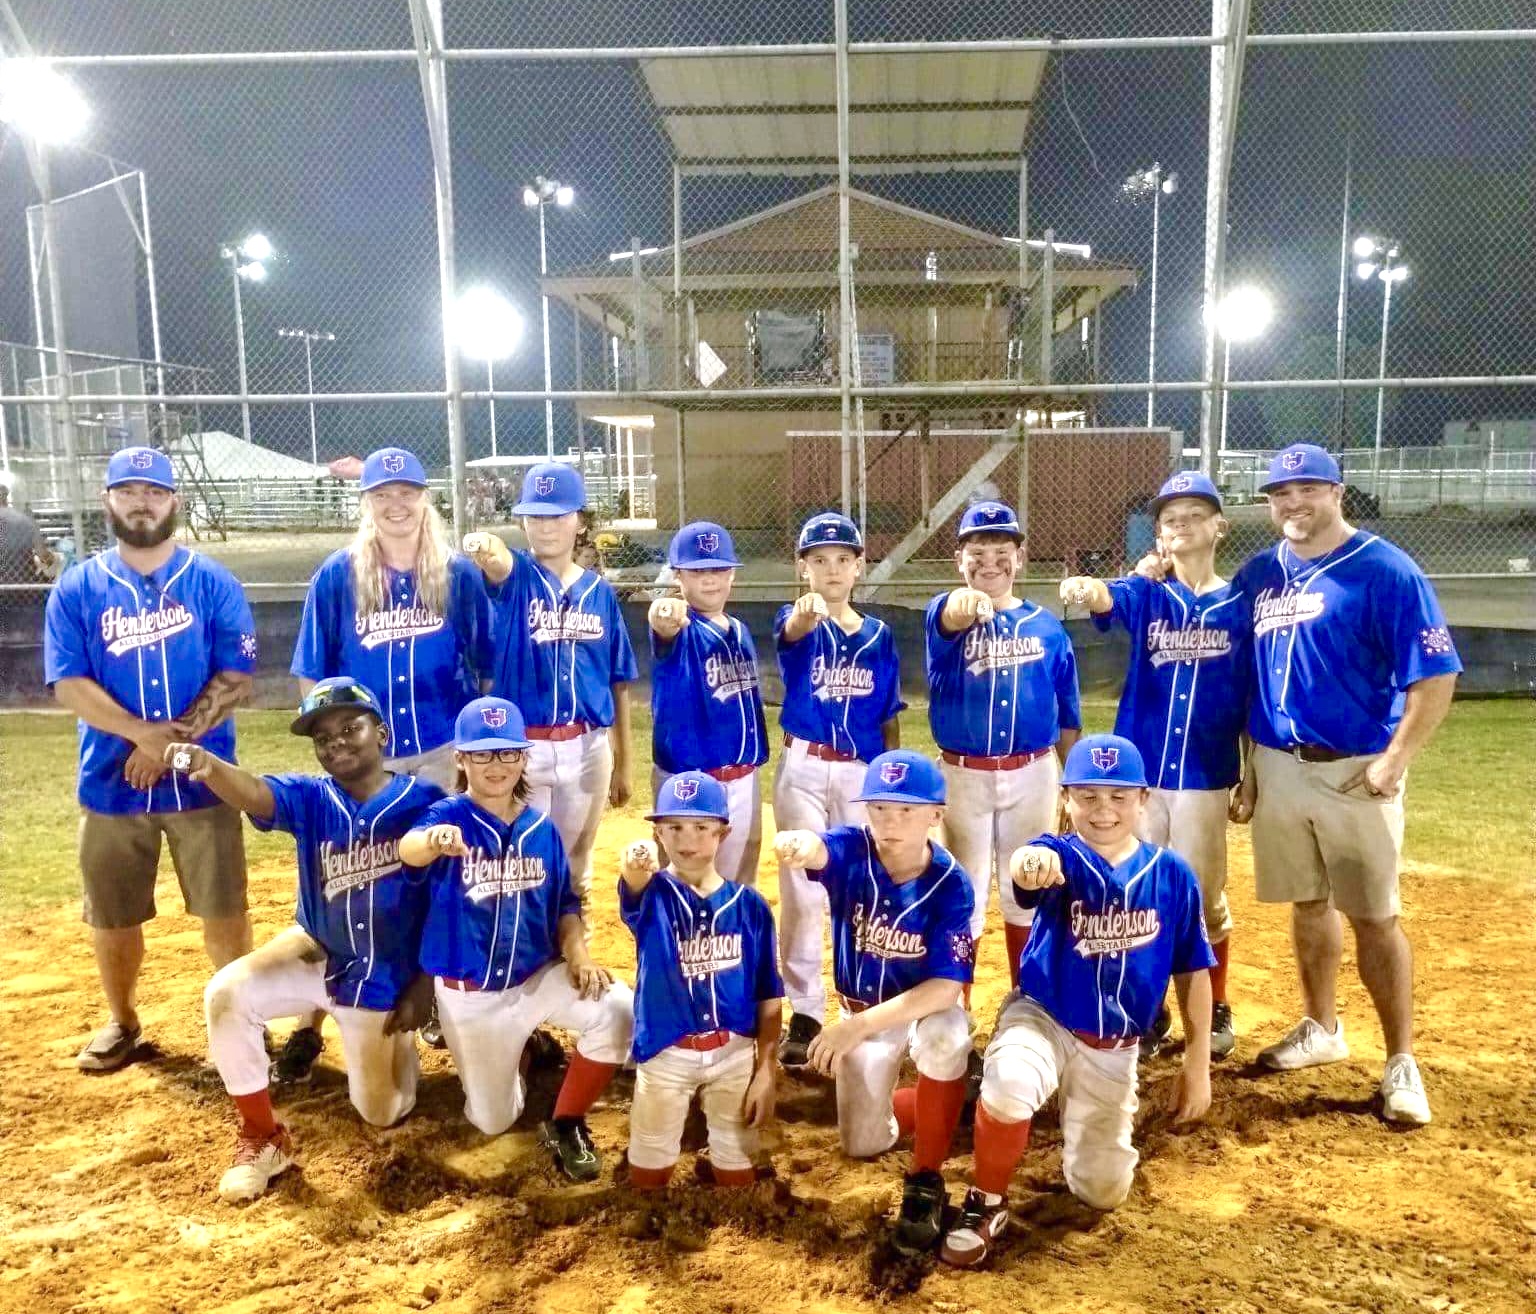 Members of the Henderson Boys Baseball Association's 11-Under All-Stars (above) posed for this photo. The kids will go to Paris for their age group's state tournament later this month. The HBBA T-ball All-Stars (below, inset) are also headed to a state tournament for their age group (in Corsicana, on June 22), and the 12-U HBBA All-Stars are going to Center for regionals on June 29. (Photos courtesy of HENDERSON BOYS BASEBALL ASSOCIATION)